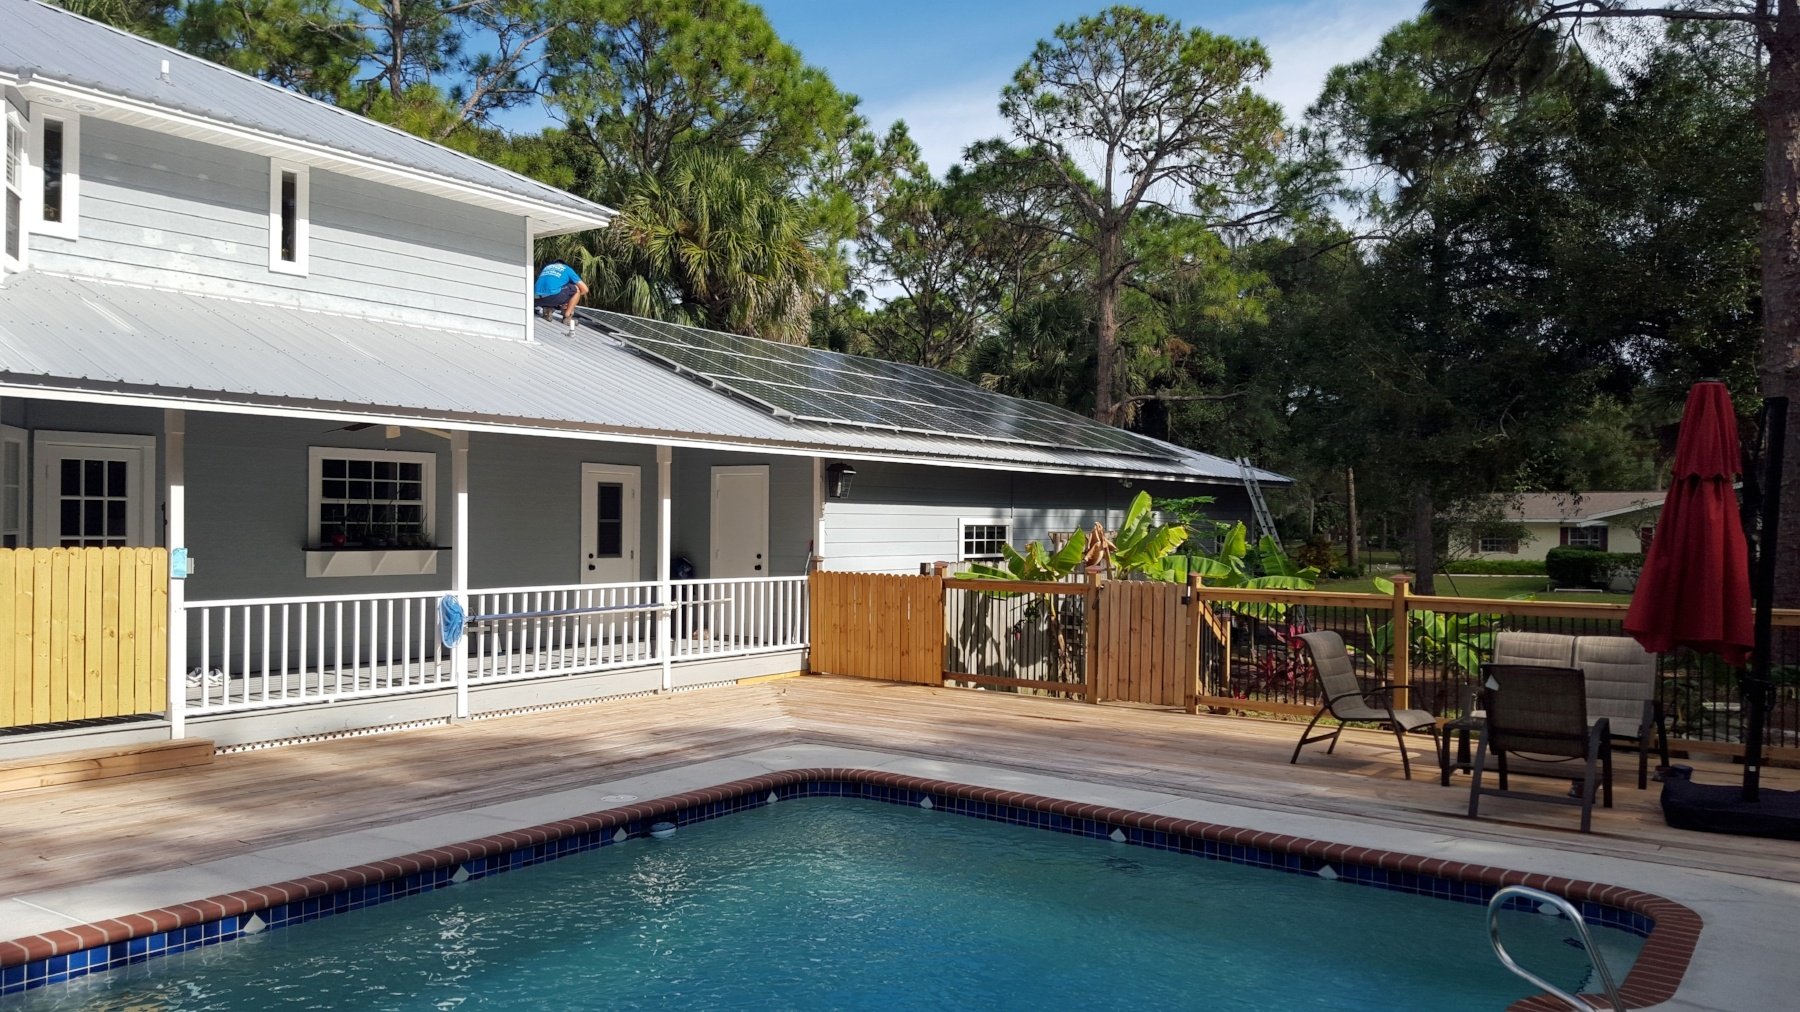 solar-source-pool-heating-panels-energy-central-florida